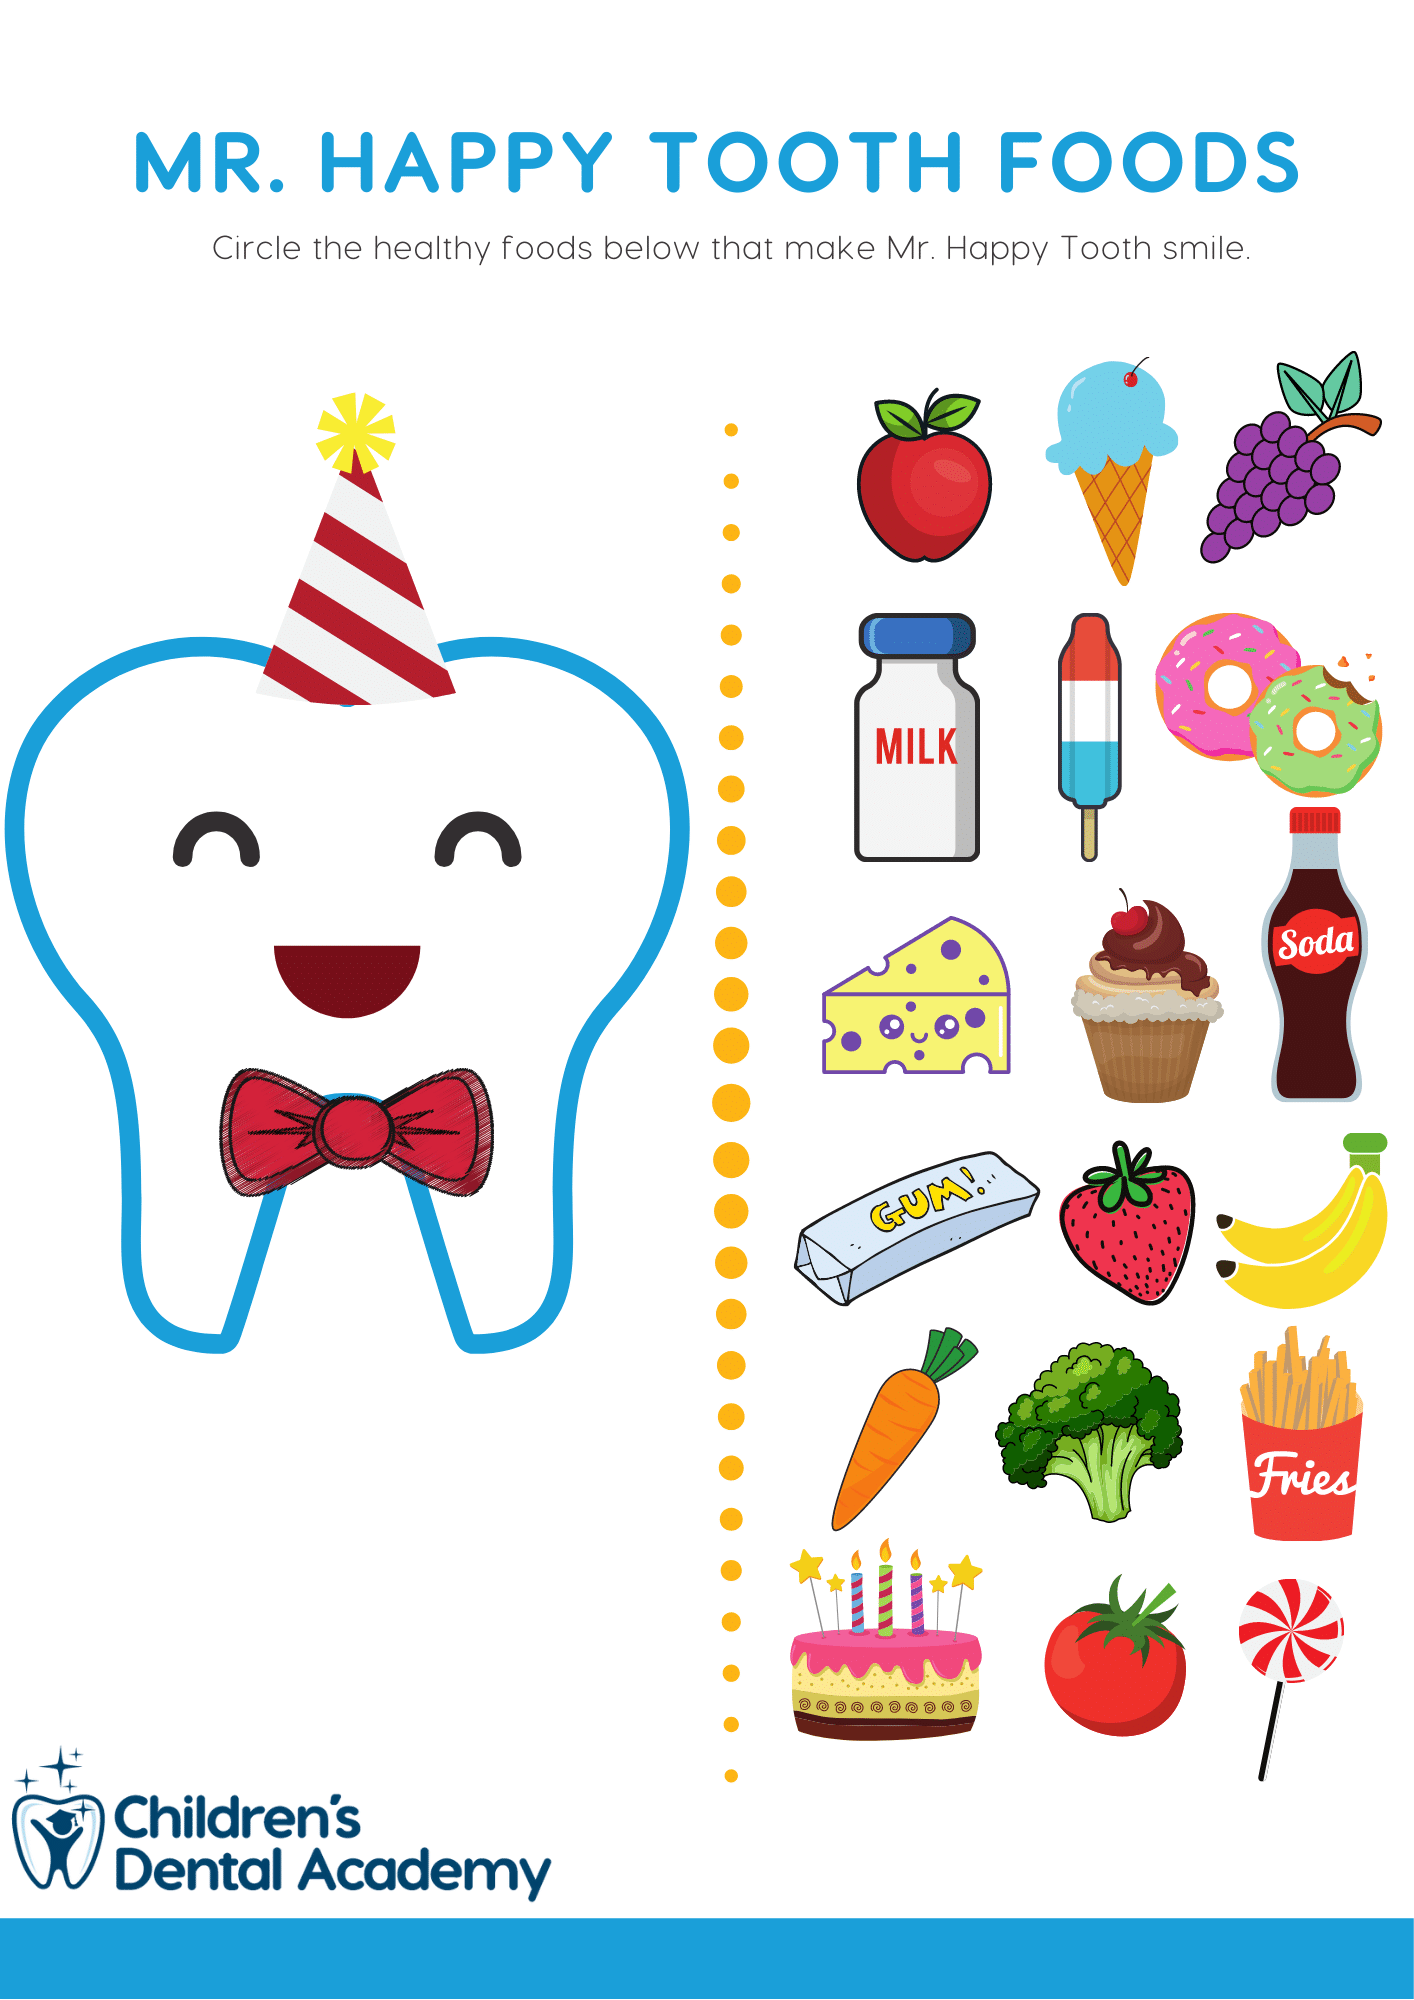 mr. happy tooth foods image activity